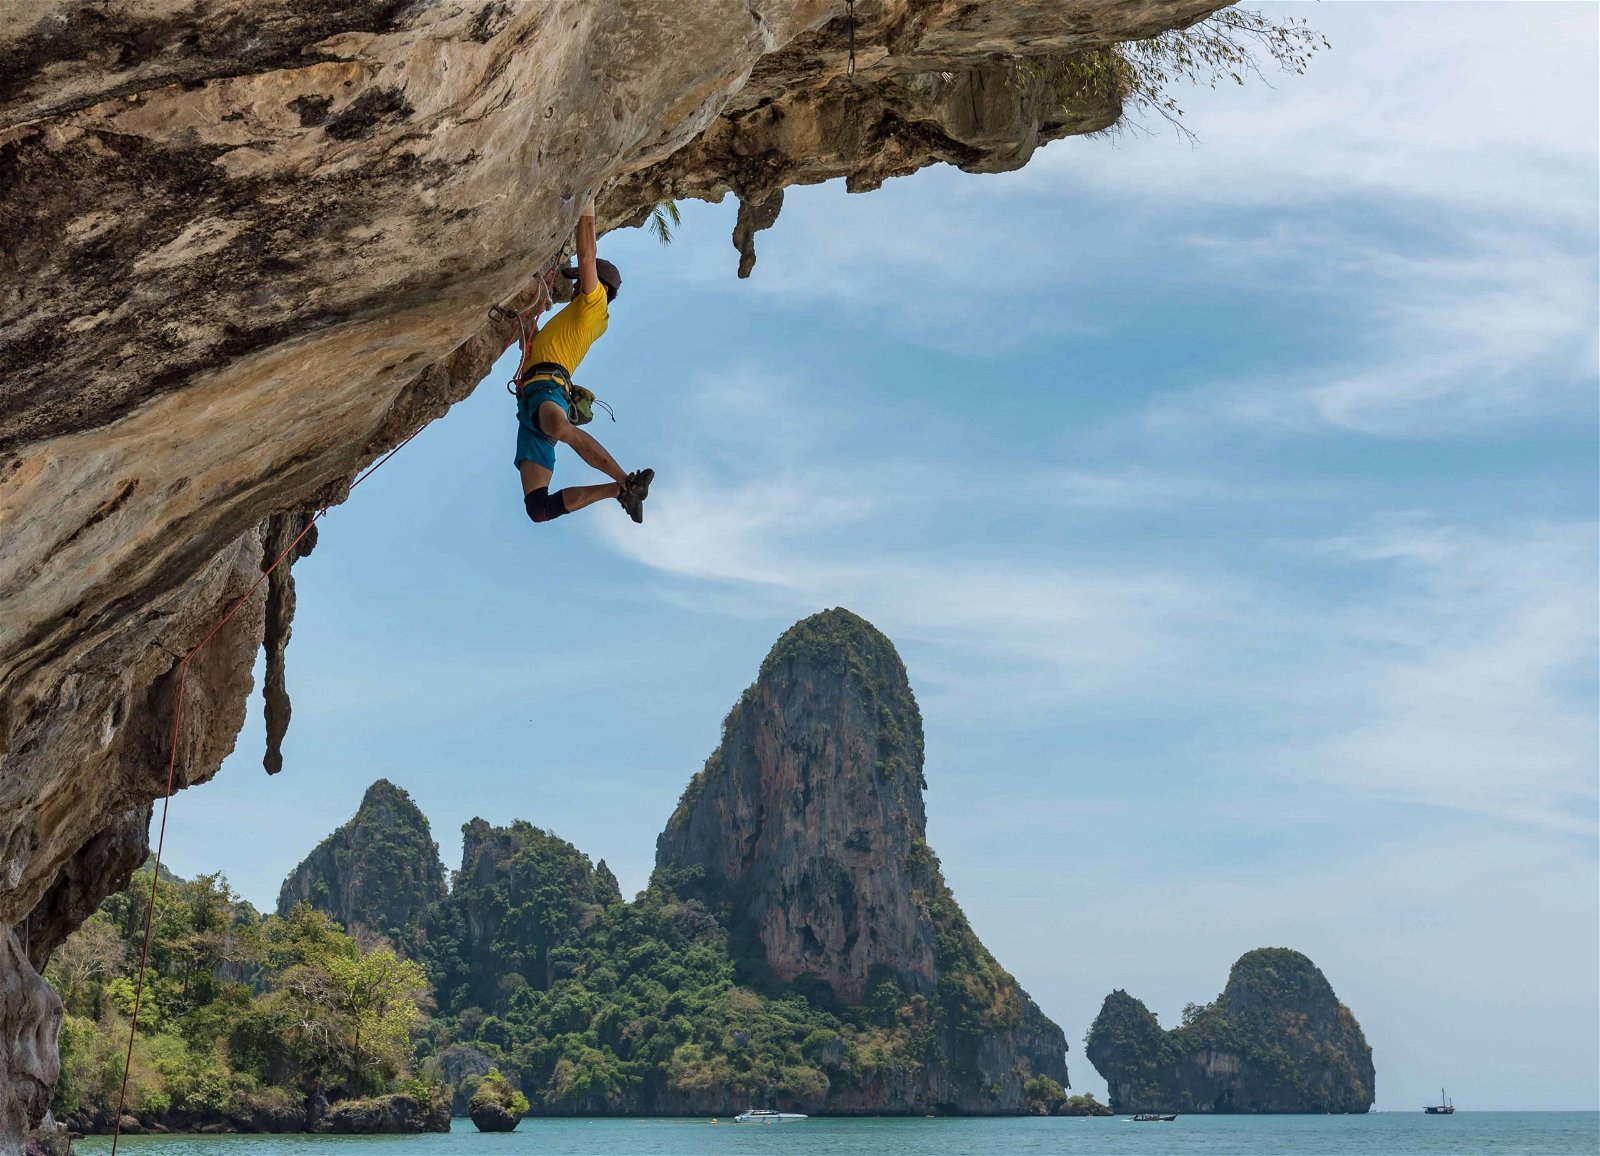 With adventure photography, your equipment needs to be durable and portable so you can get images such as this rock climber.